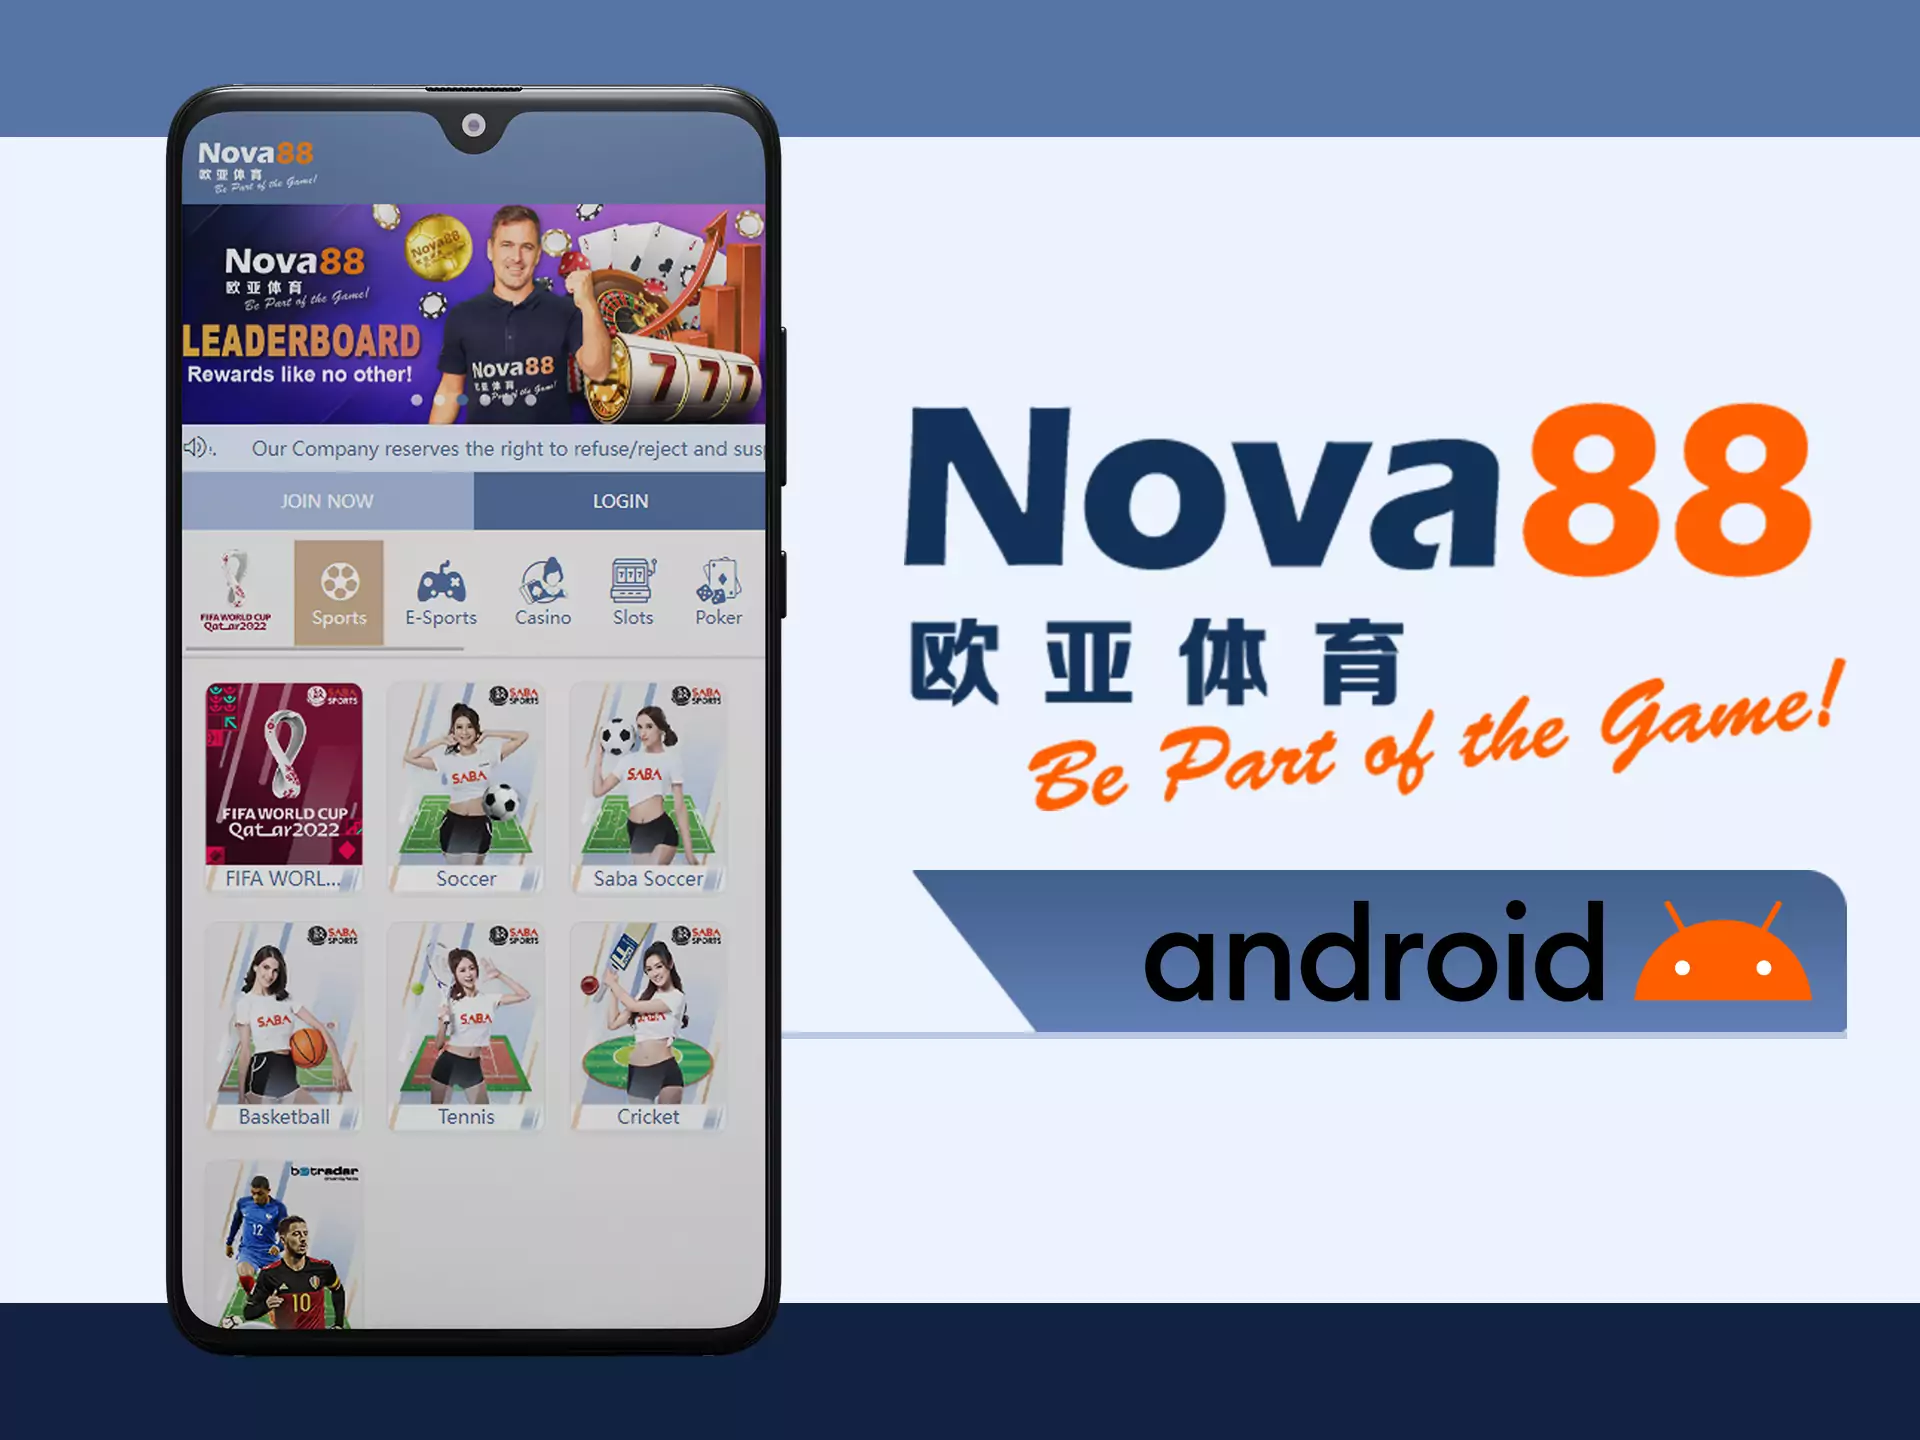 Download and install Nova88 app on all of your android devices.